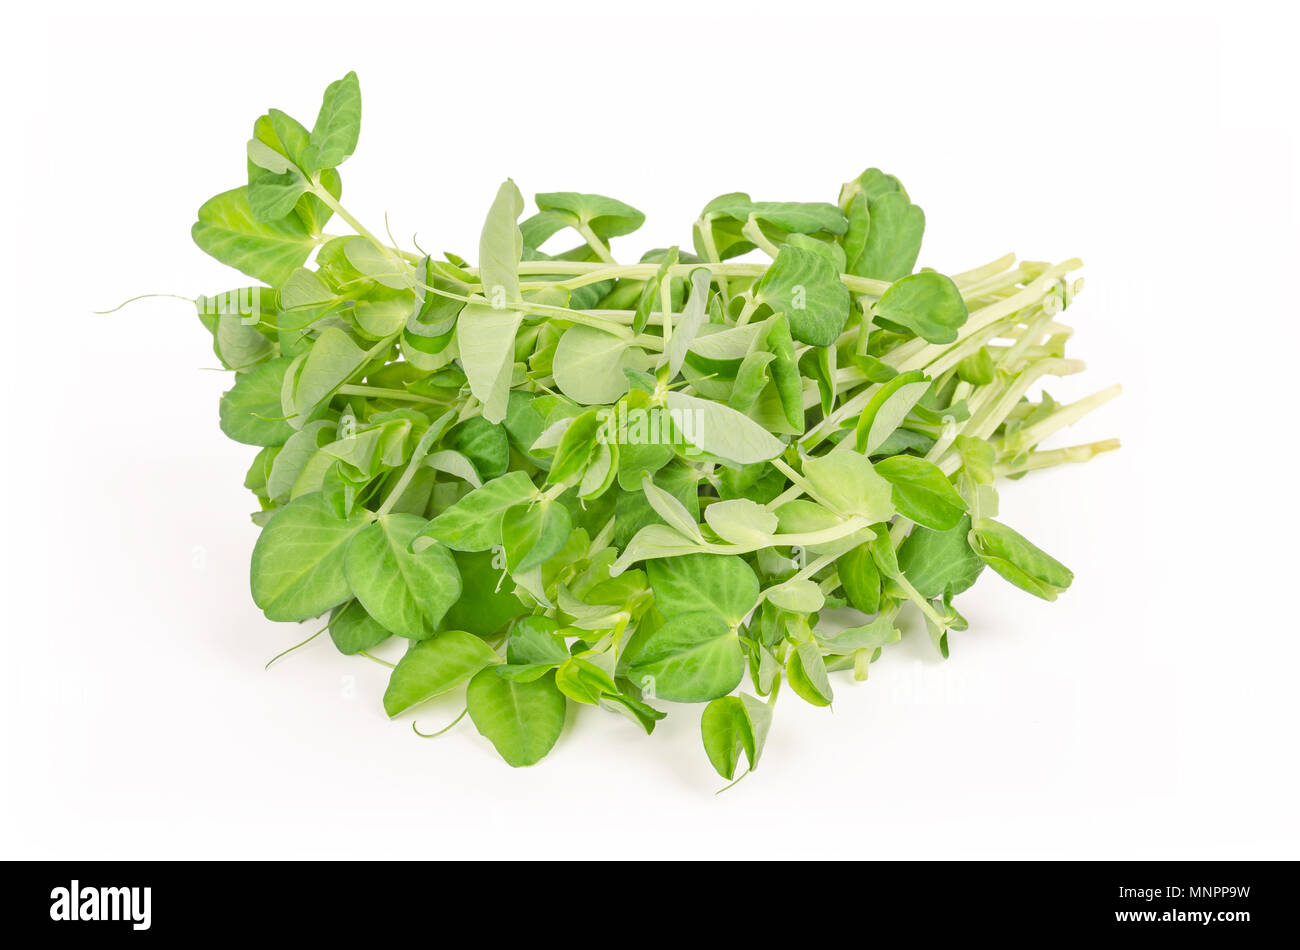 Bunch of snow pea microgreen on white background. Shoots of Pisum sativum, also called mangetout or sugar peas. Young plants, seedlings and sprouts. Stock Photo